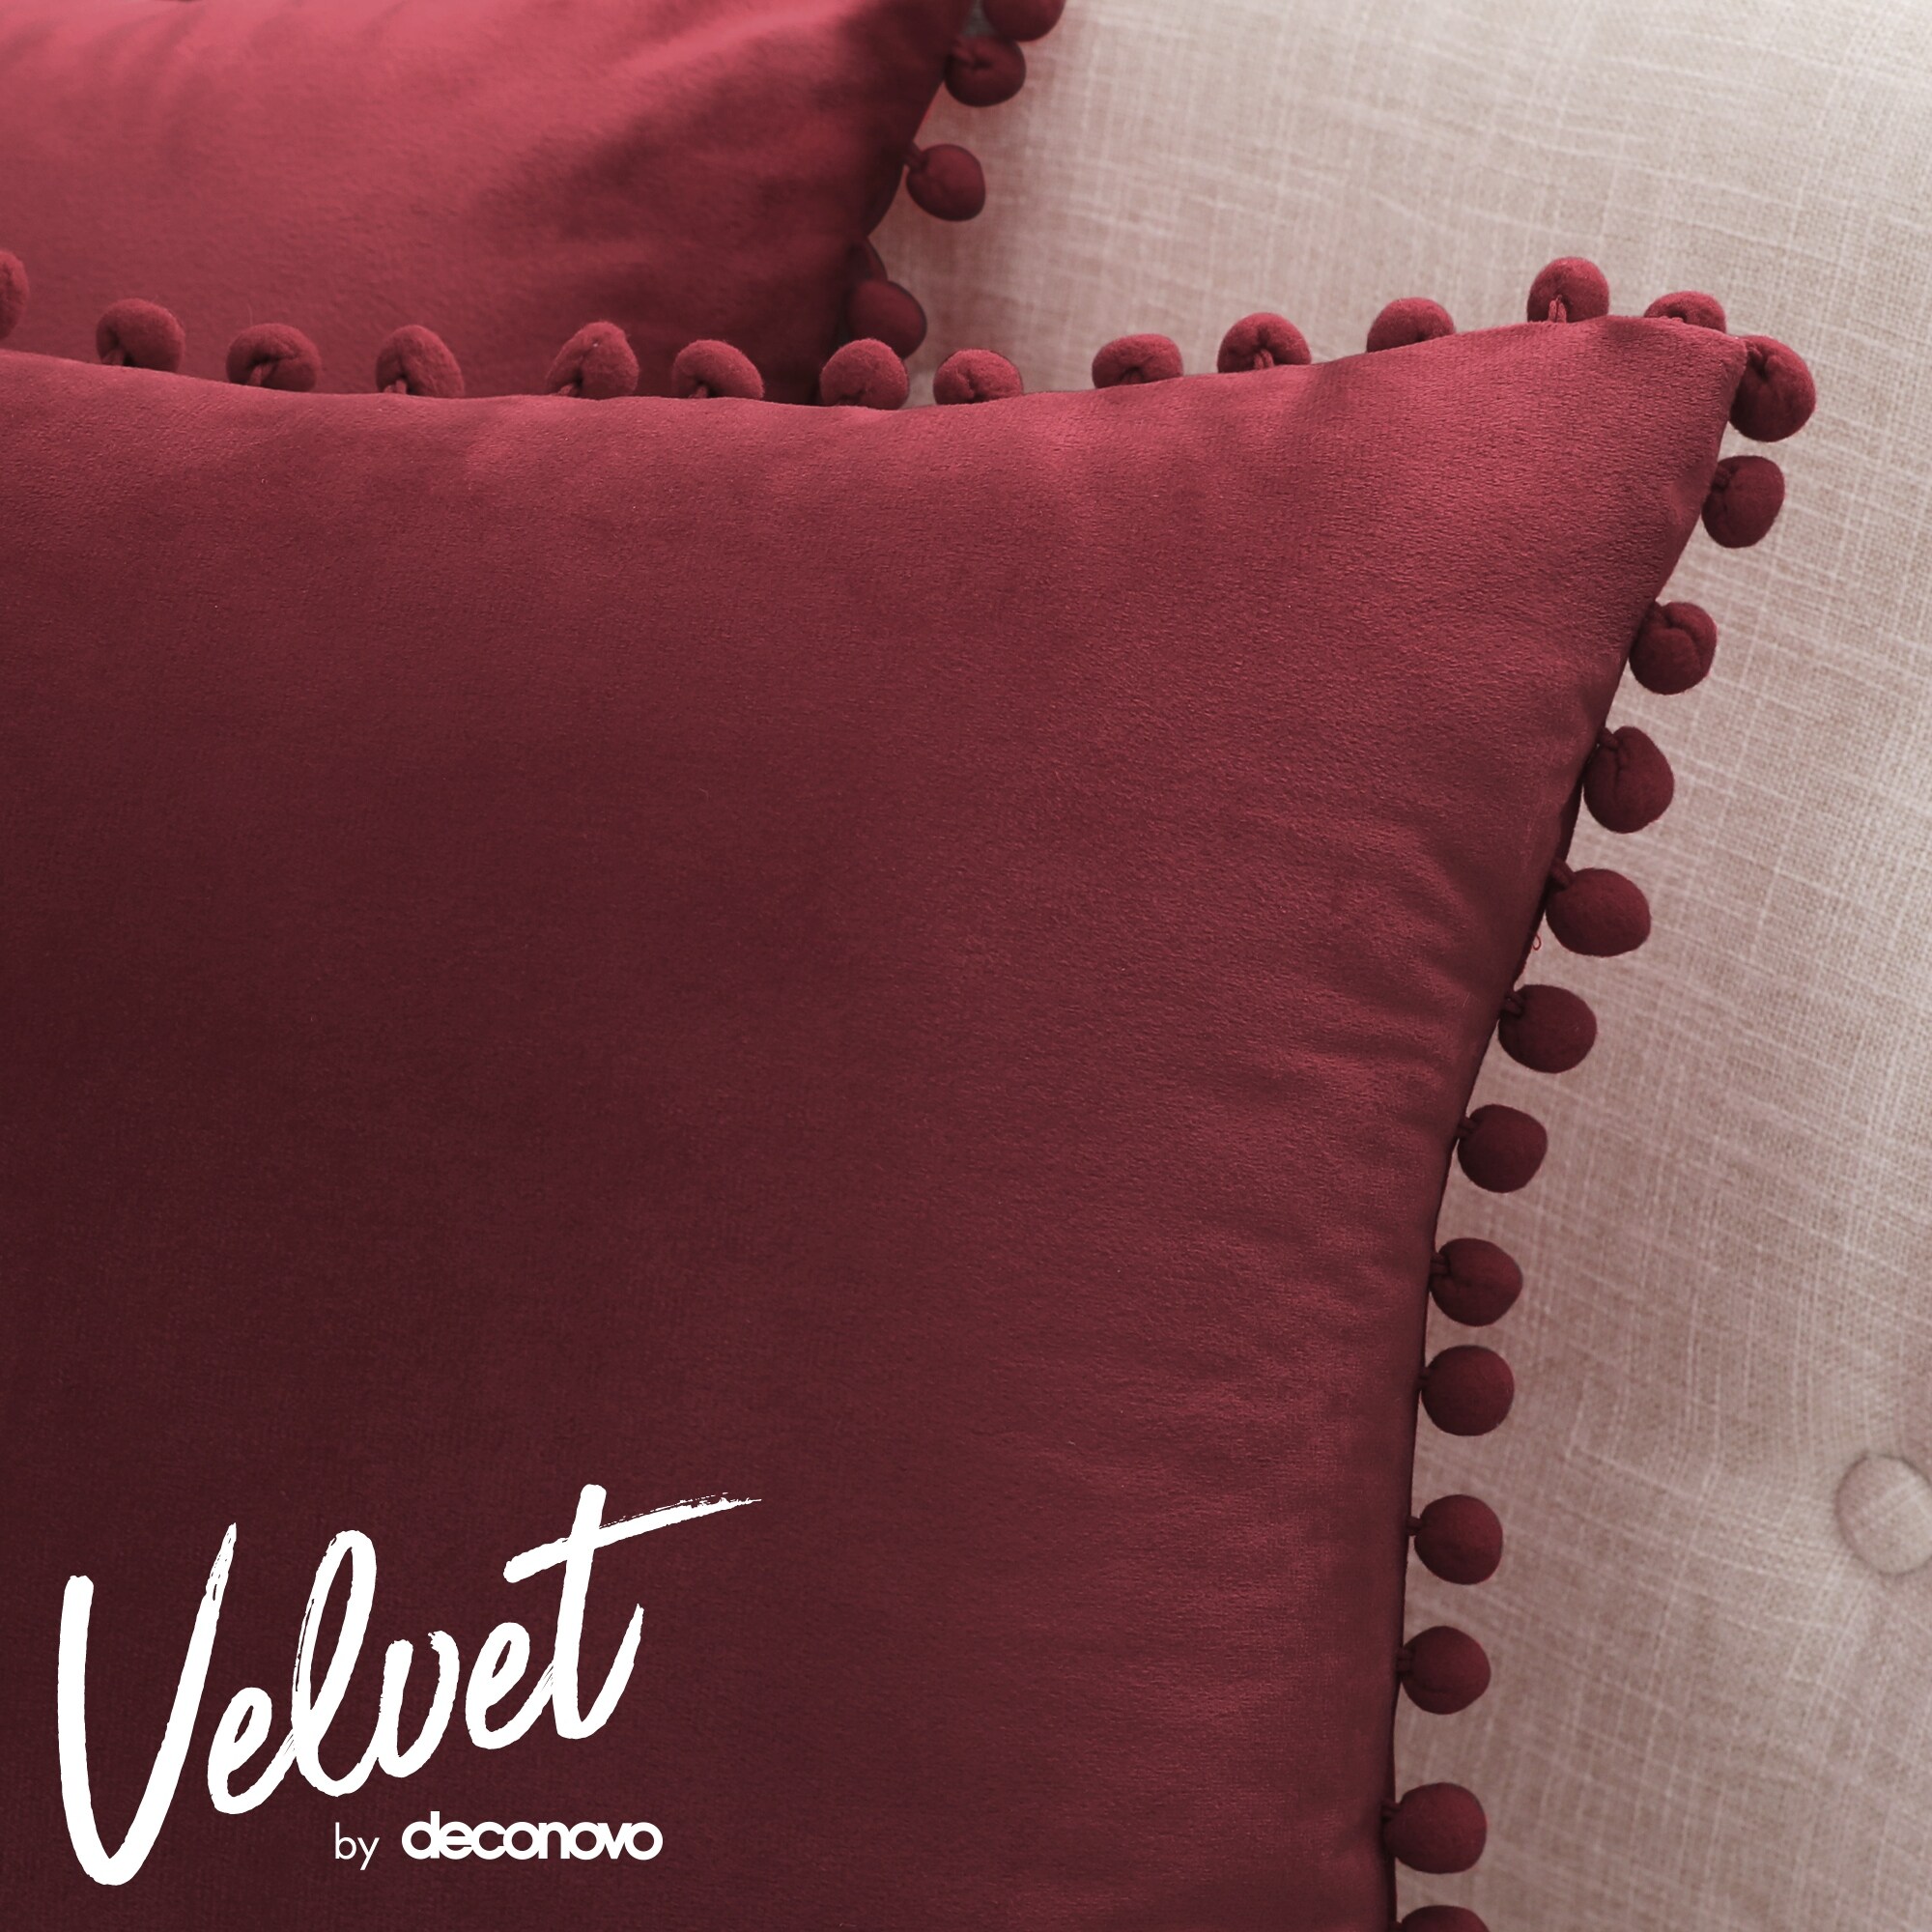 https://ak1.ostkcdn.com/images/products/is/images/direct/3e06c4619a0eb9917d3af80280ebee4be096a319/Deconovo-Velvet-Pom-poms-Throw-Pillow-Covers-2-Pieces.jpg